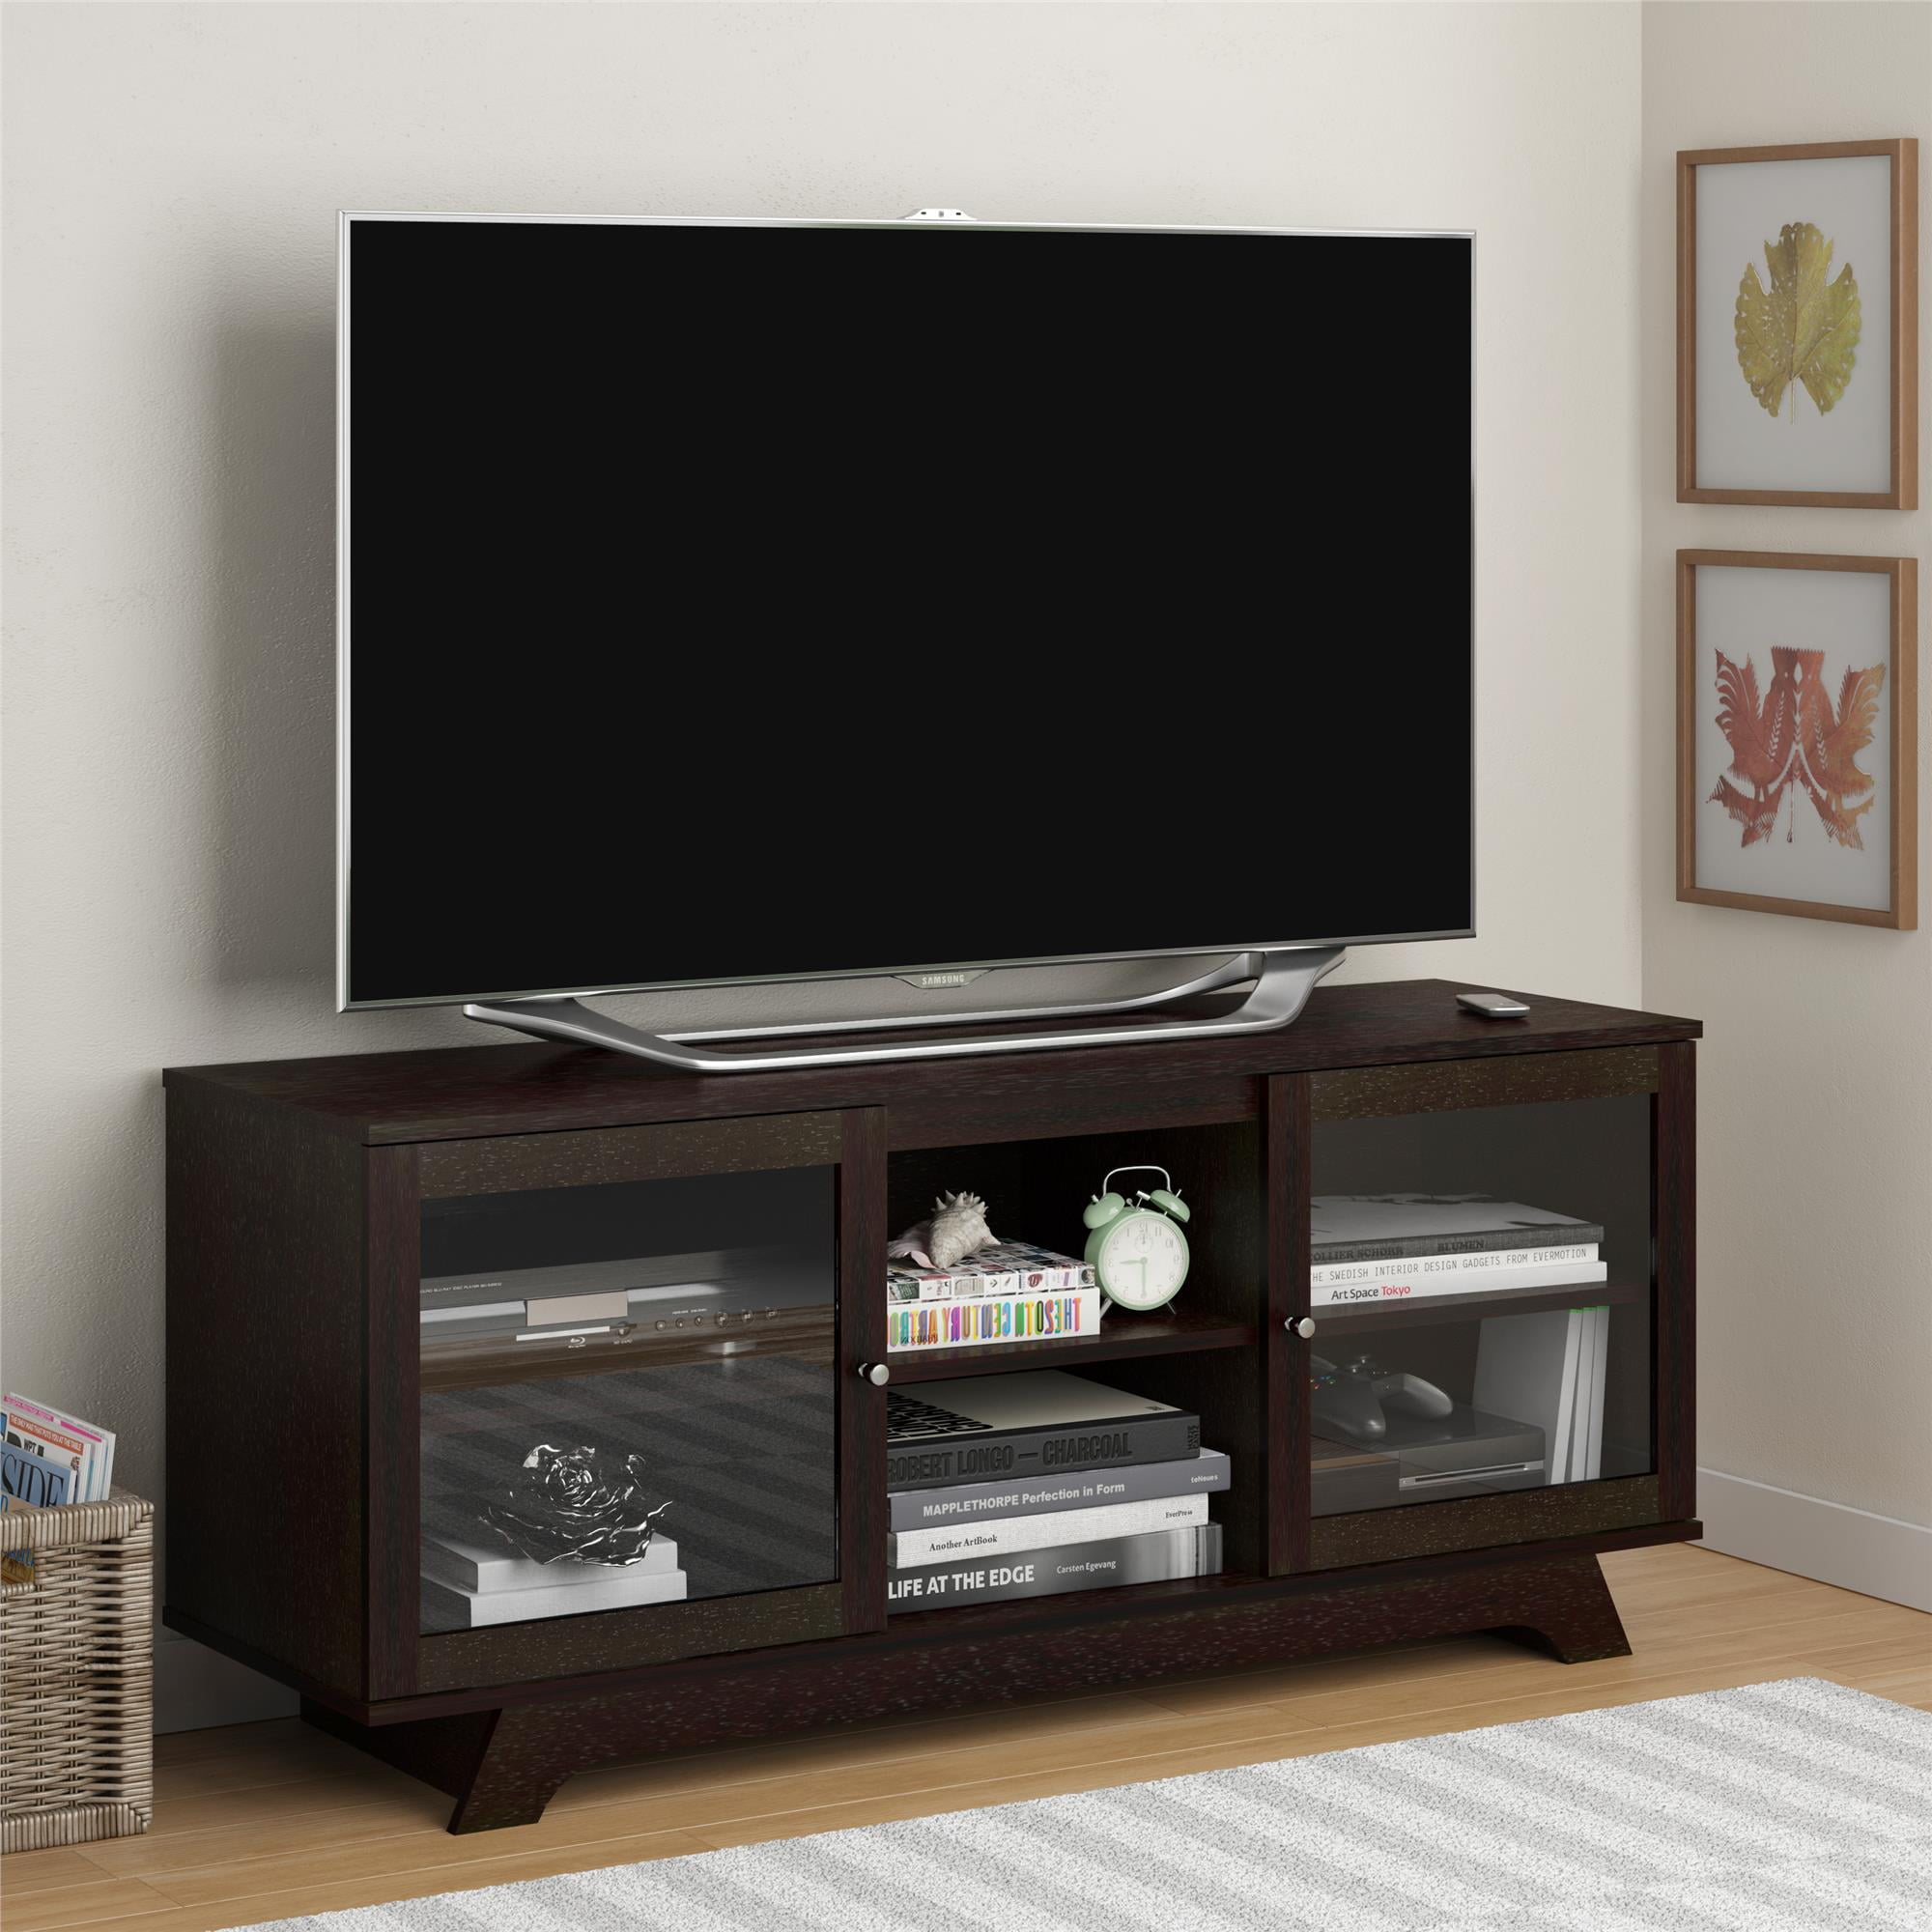 Espresso Wood 58 Durbin TV Stand For TVs Up To 75 Home Entertainment Center 